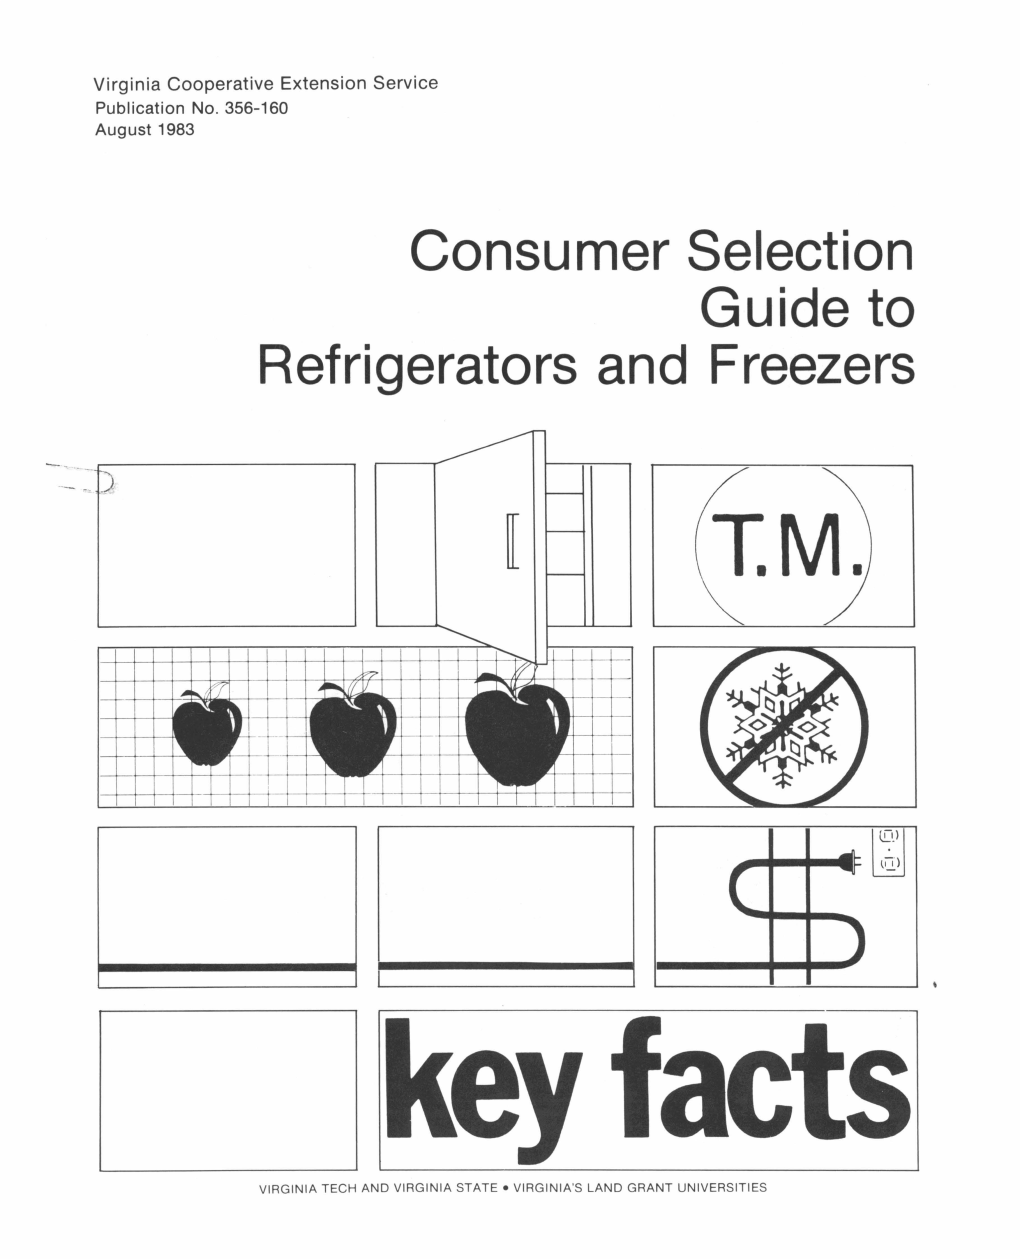 Consumer Selection Guide to Refrigerators and Freezers